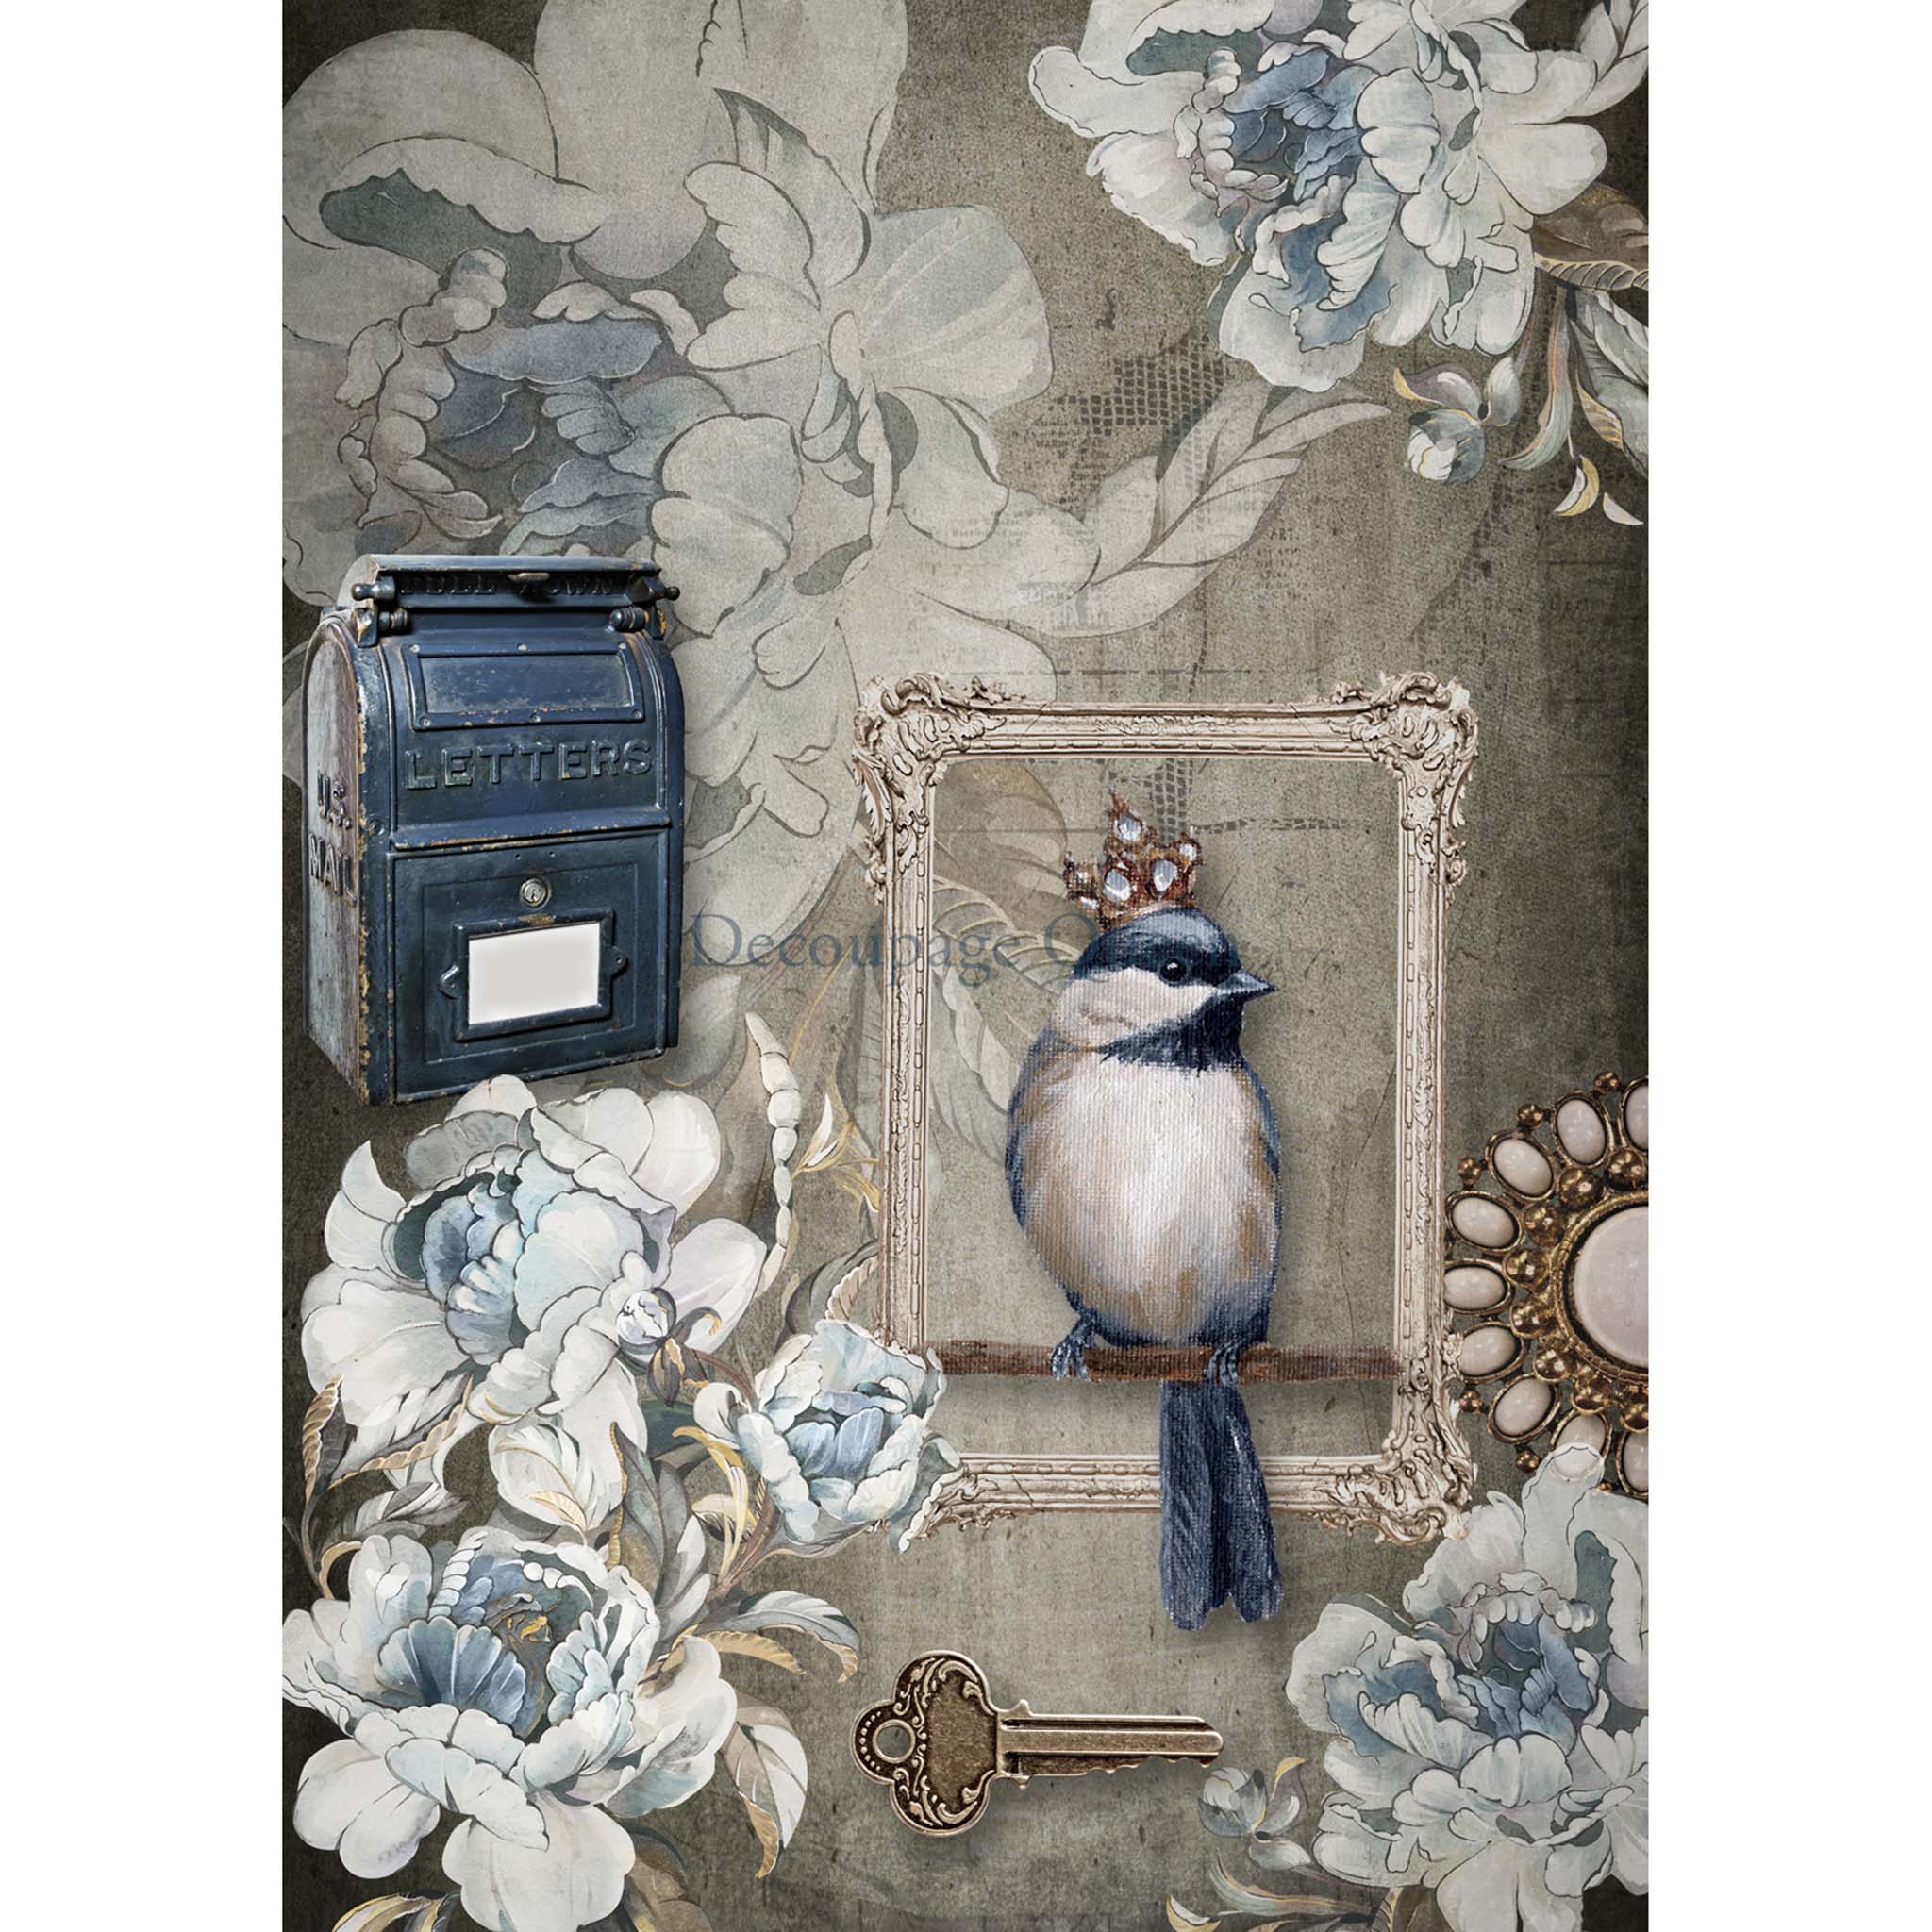 A4 rice paper design that features a distressed background behind a nostalgic mailbox, delicate flowers in white and blue, and a regal bird in a picture frame. White borders are on the sides.